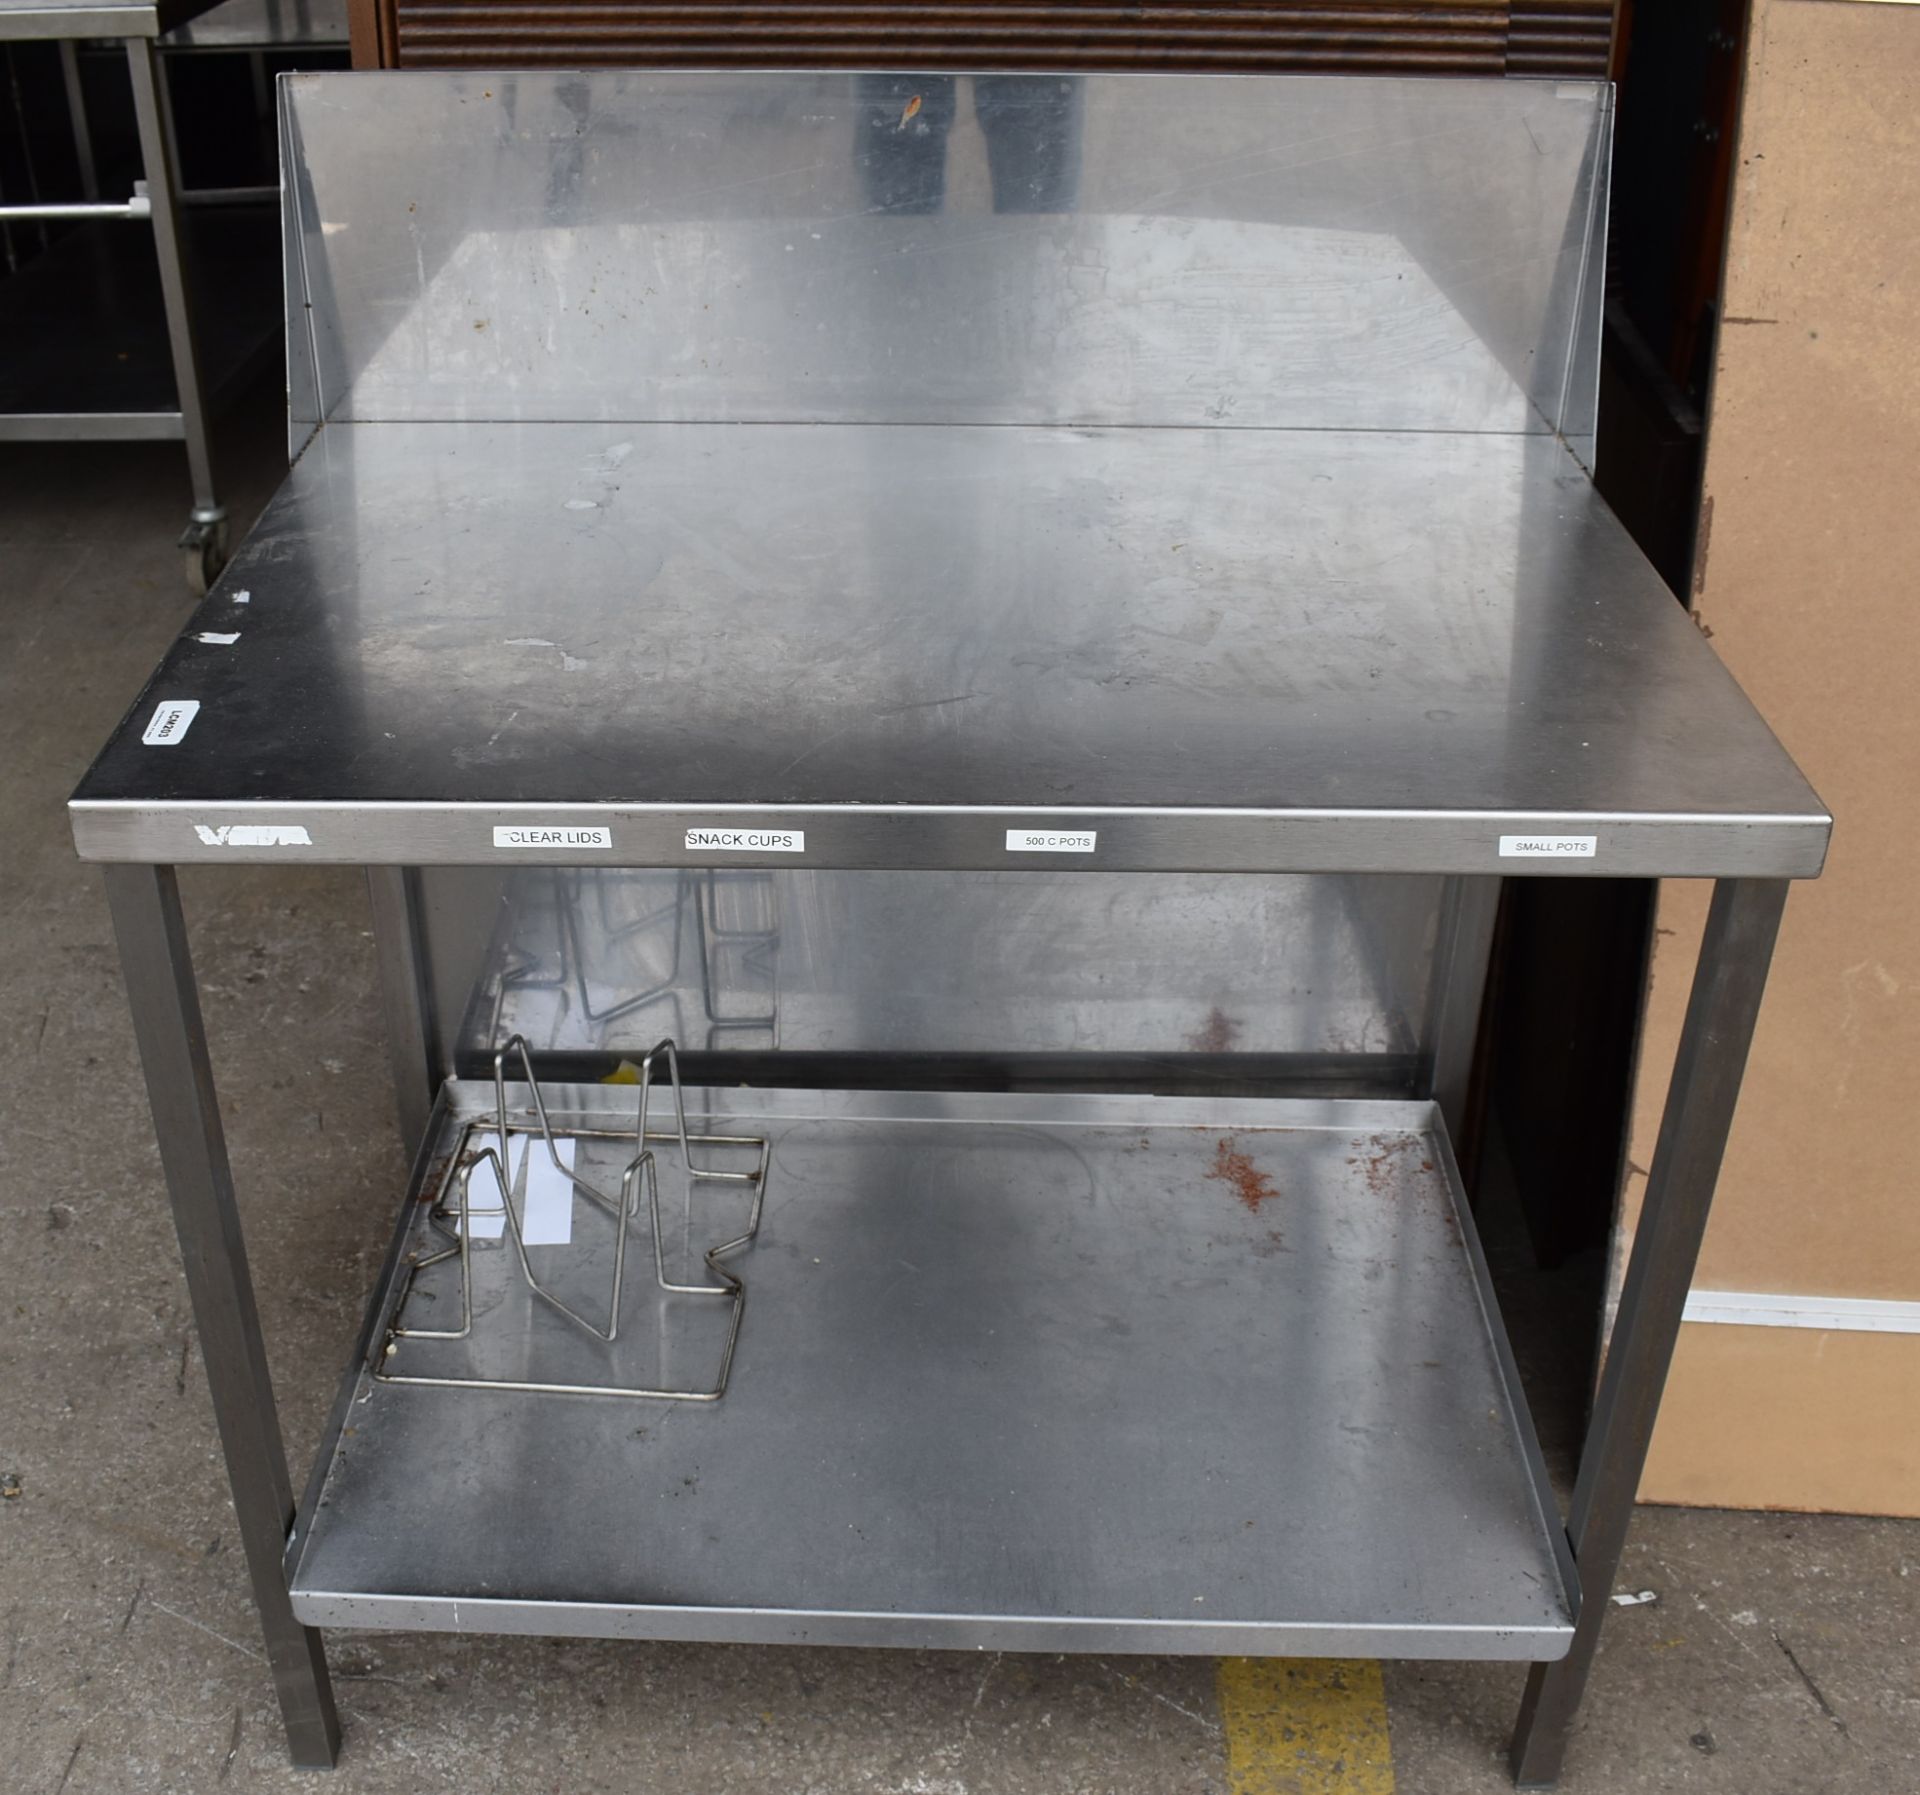 1 x Stainless Steel Prep Table With Splashback - Dimensions H82 x W93 x D62 cms - Recently Removed - Image 2 of 6